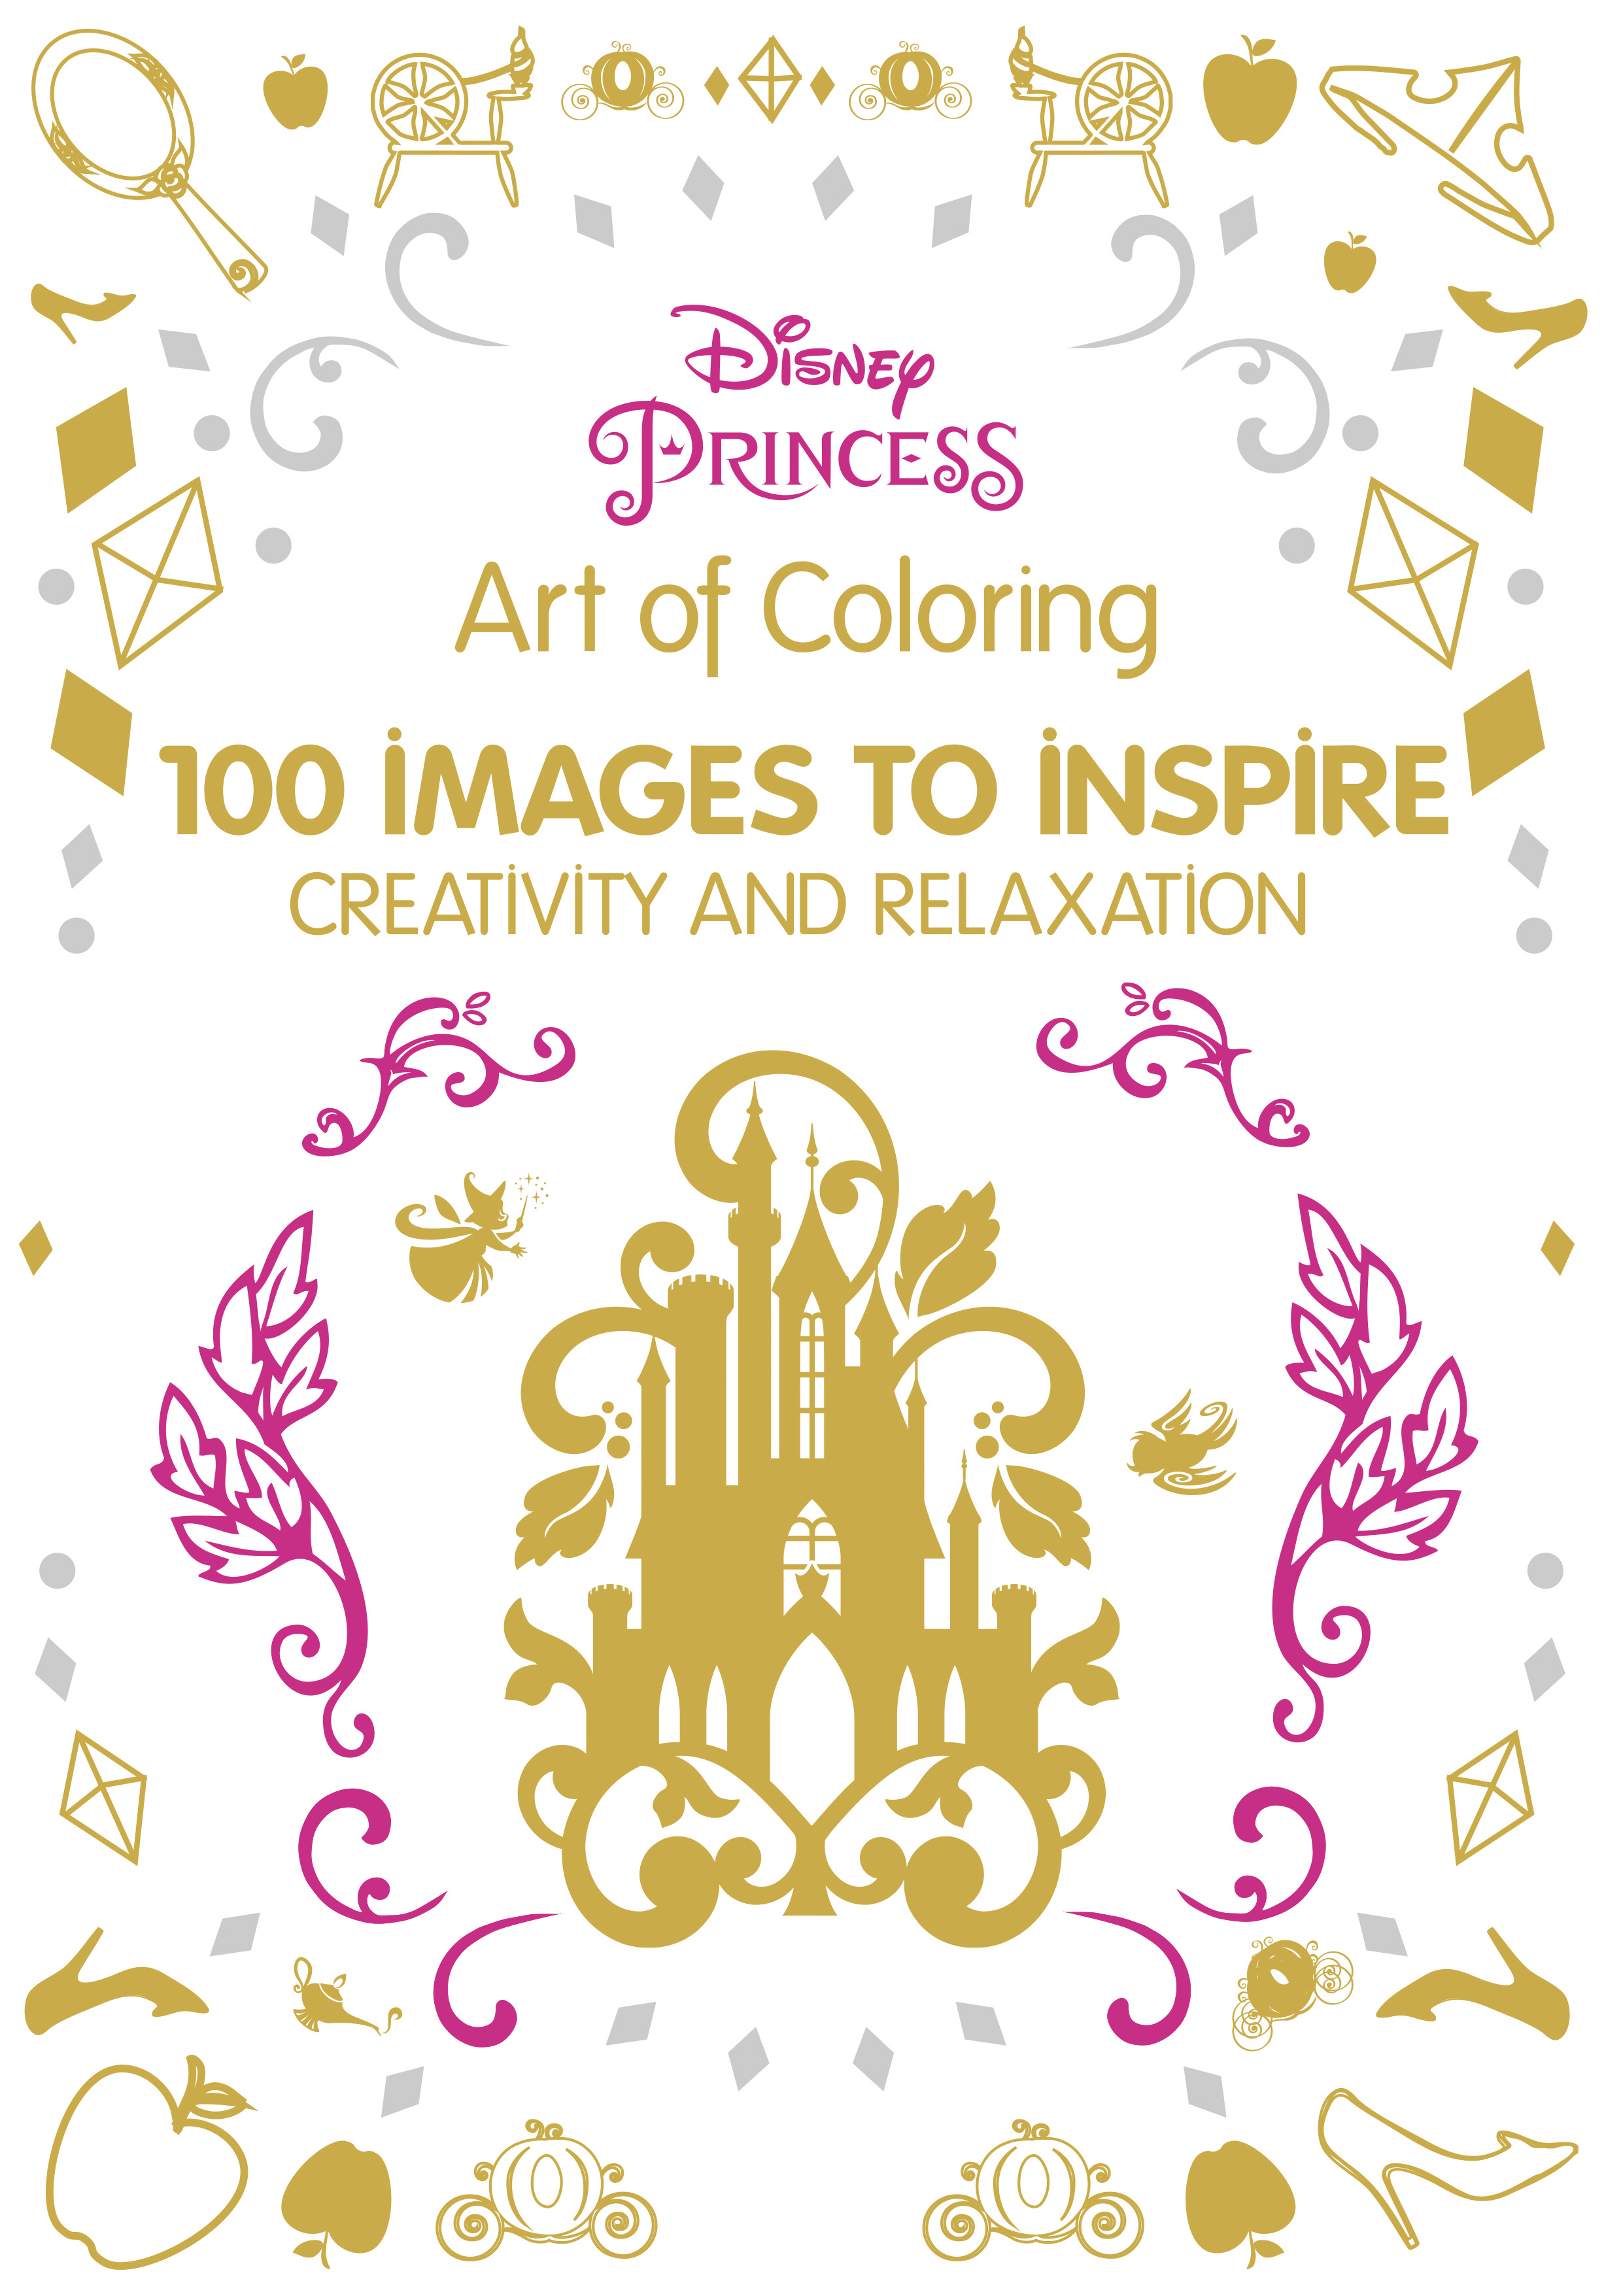 Book　Coloring　Books　Disney　100　Images　Relaxation　to　Princess　Inspire　Creativity　and　by　Group　Disney,　Disney　Art　Princess　of